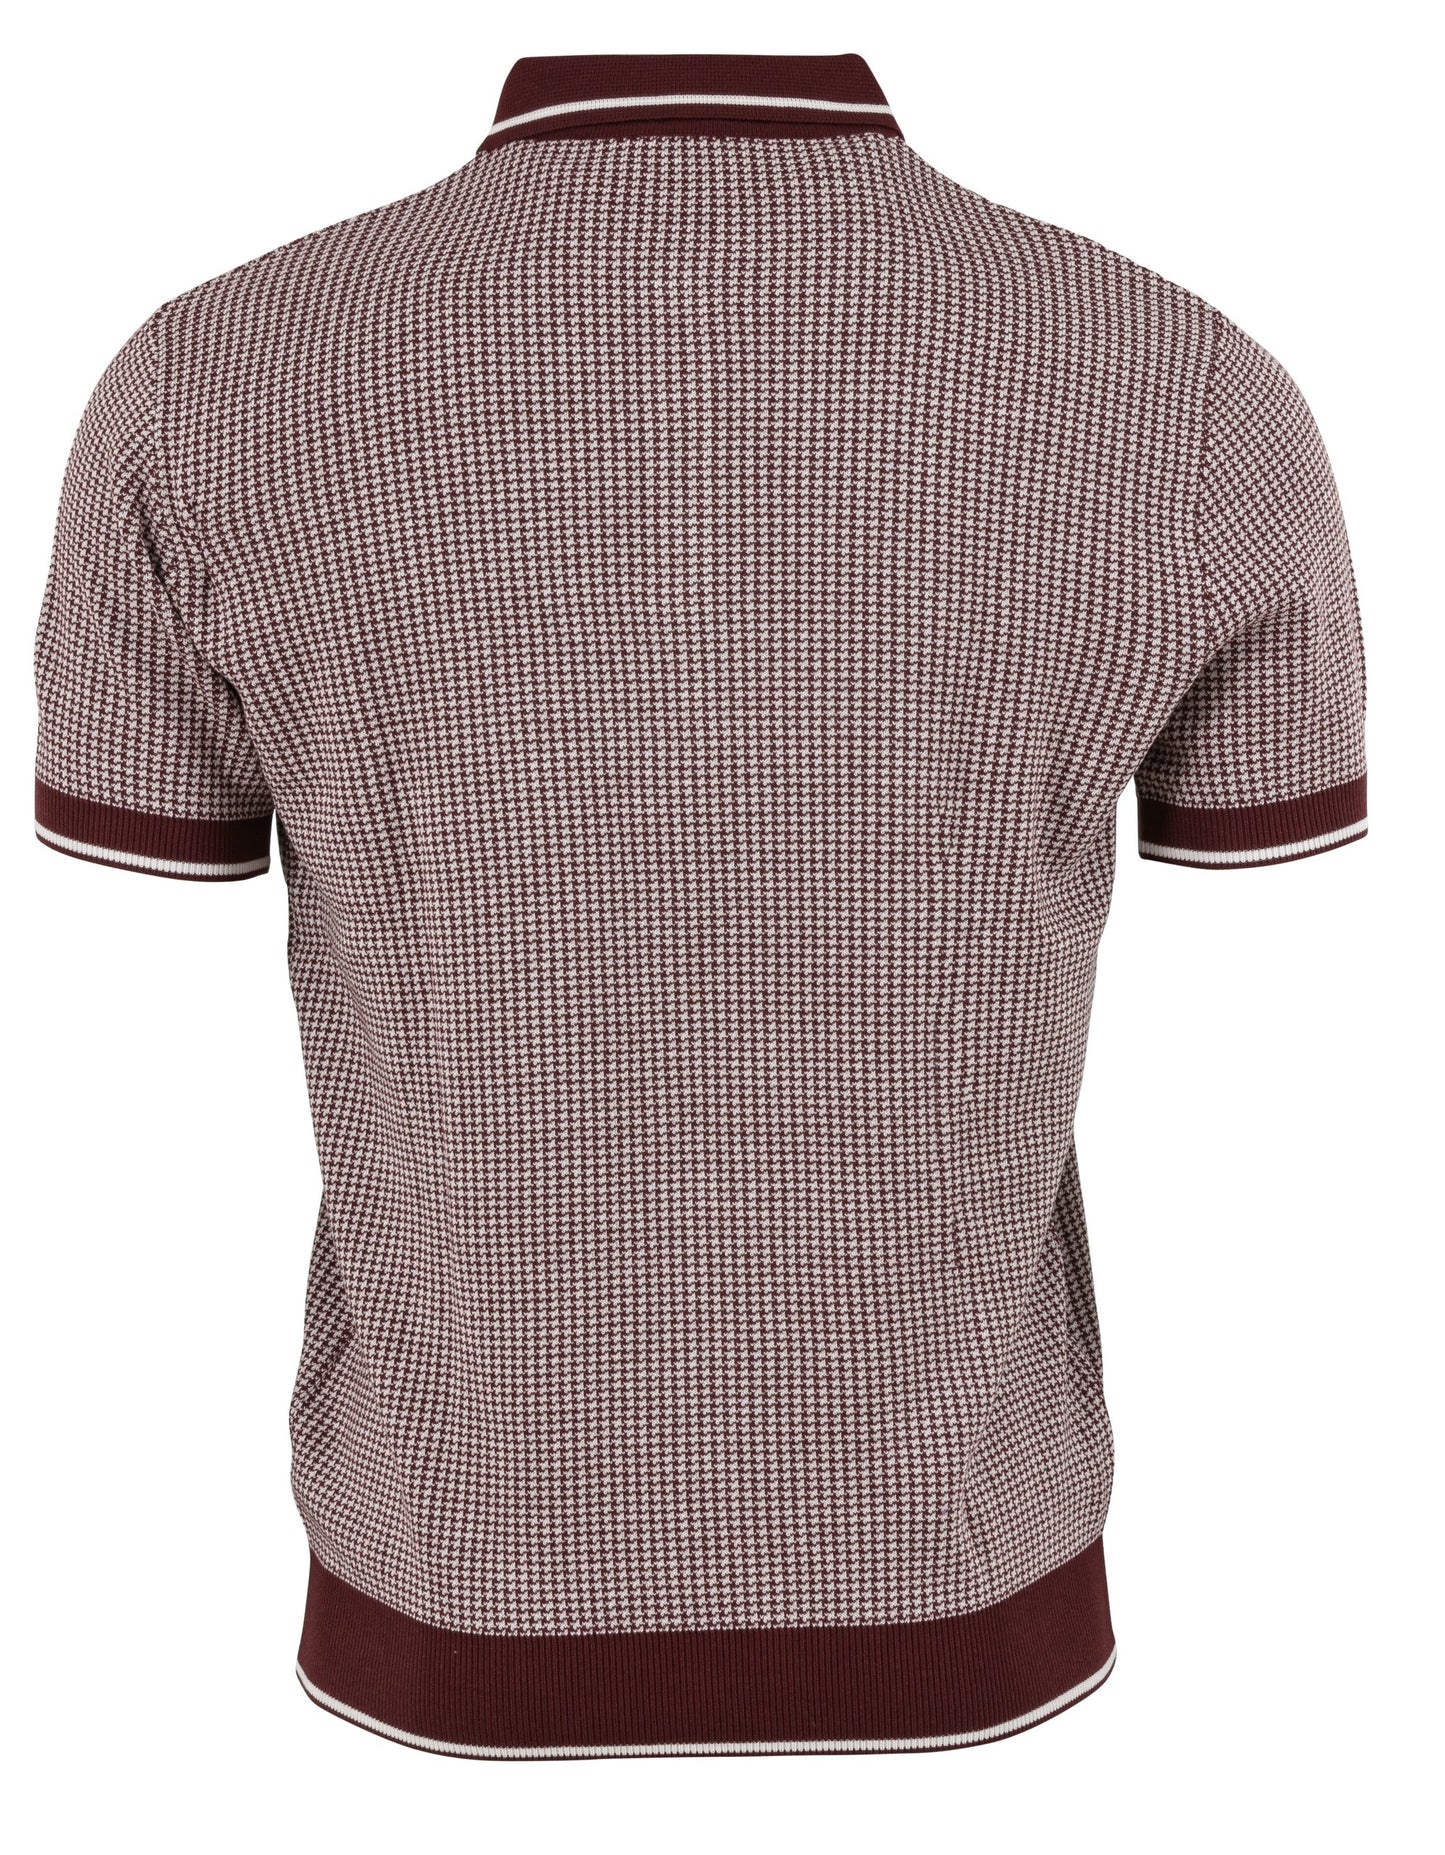 Relco Mens Burgundy/ Off White Retro Jacquard Dogtooth Knitted Polo Shirts